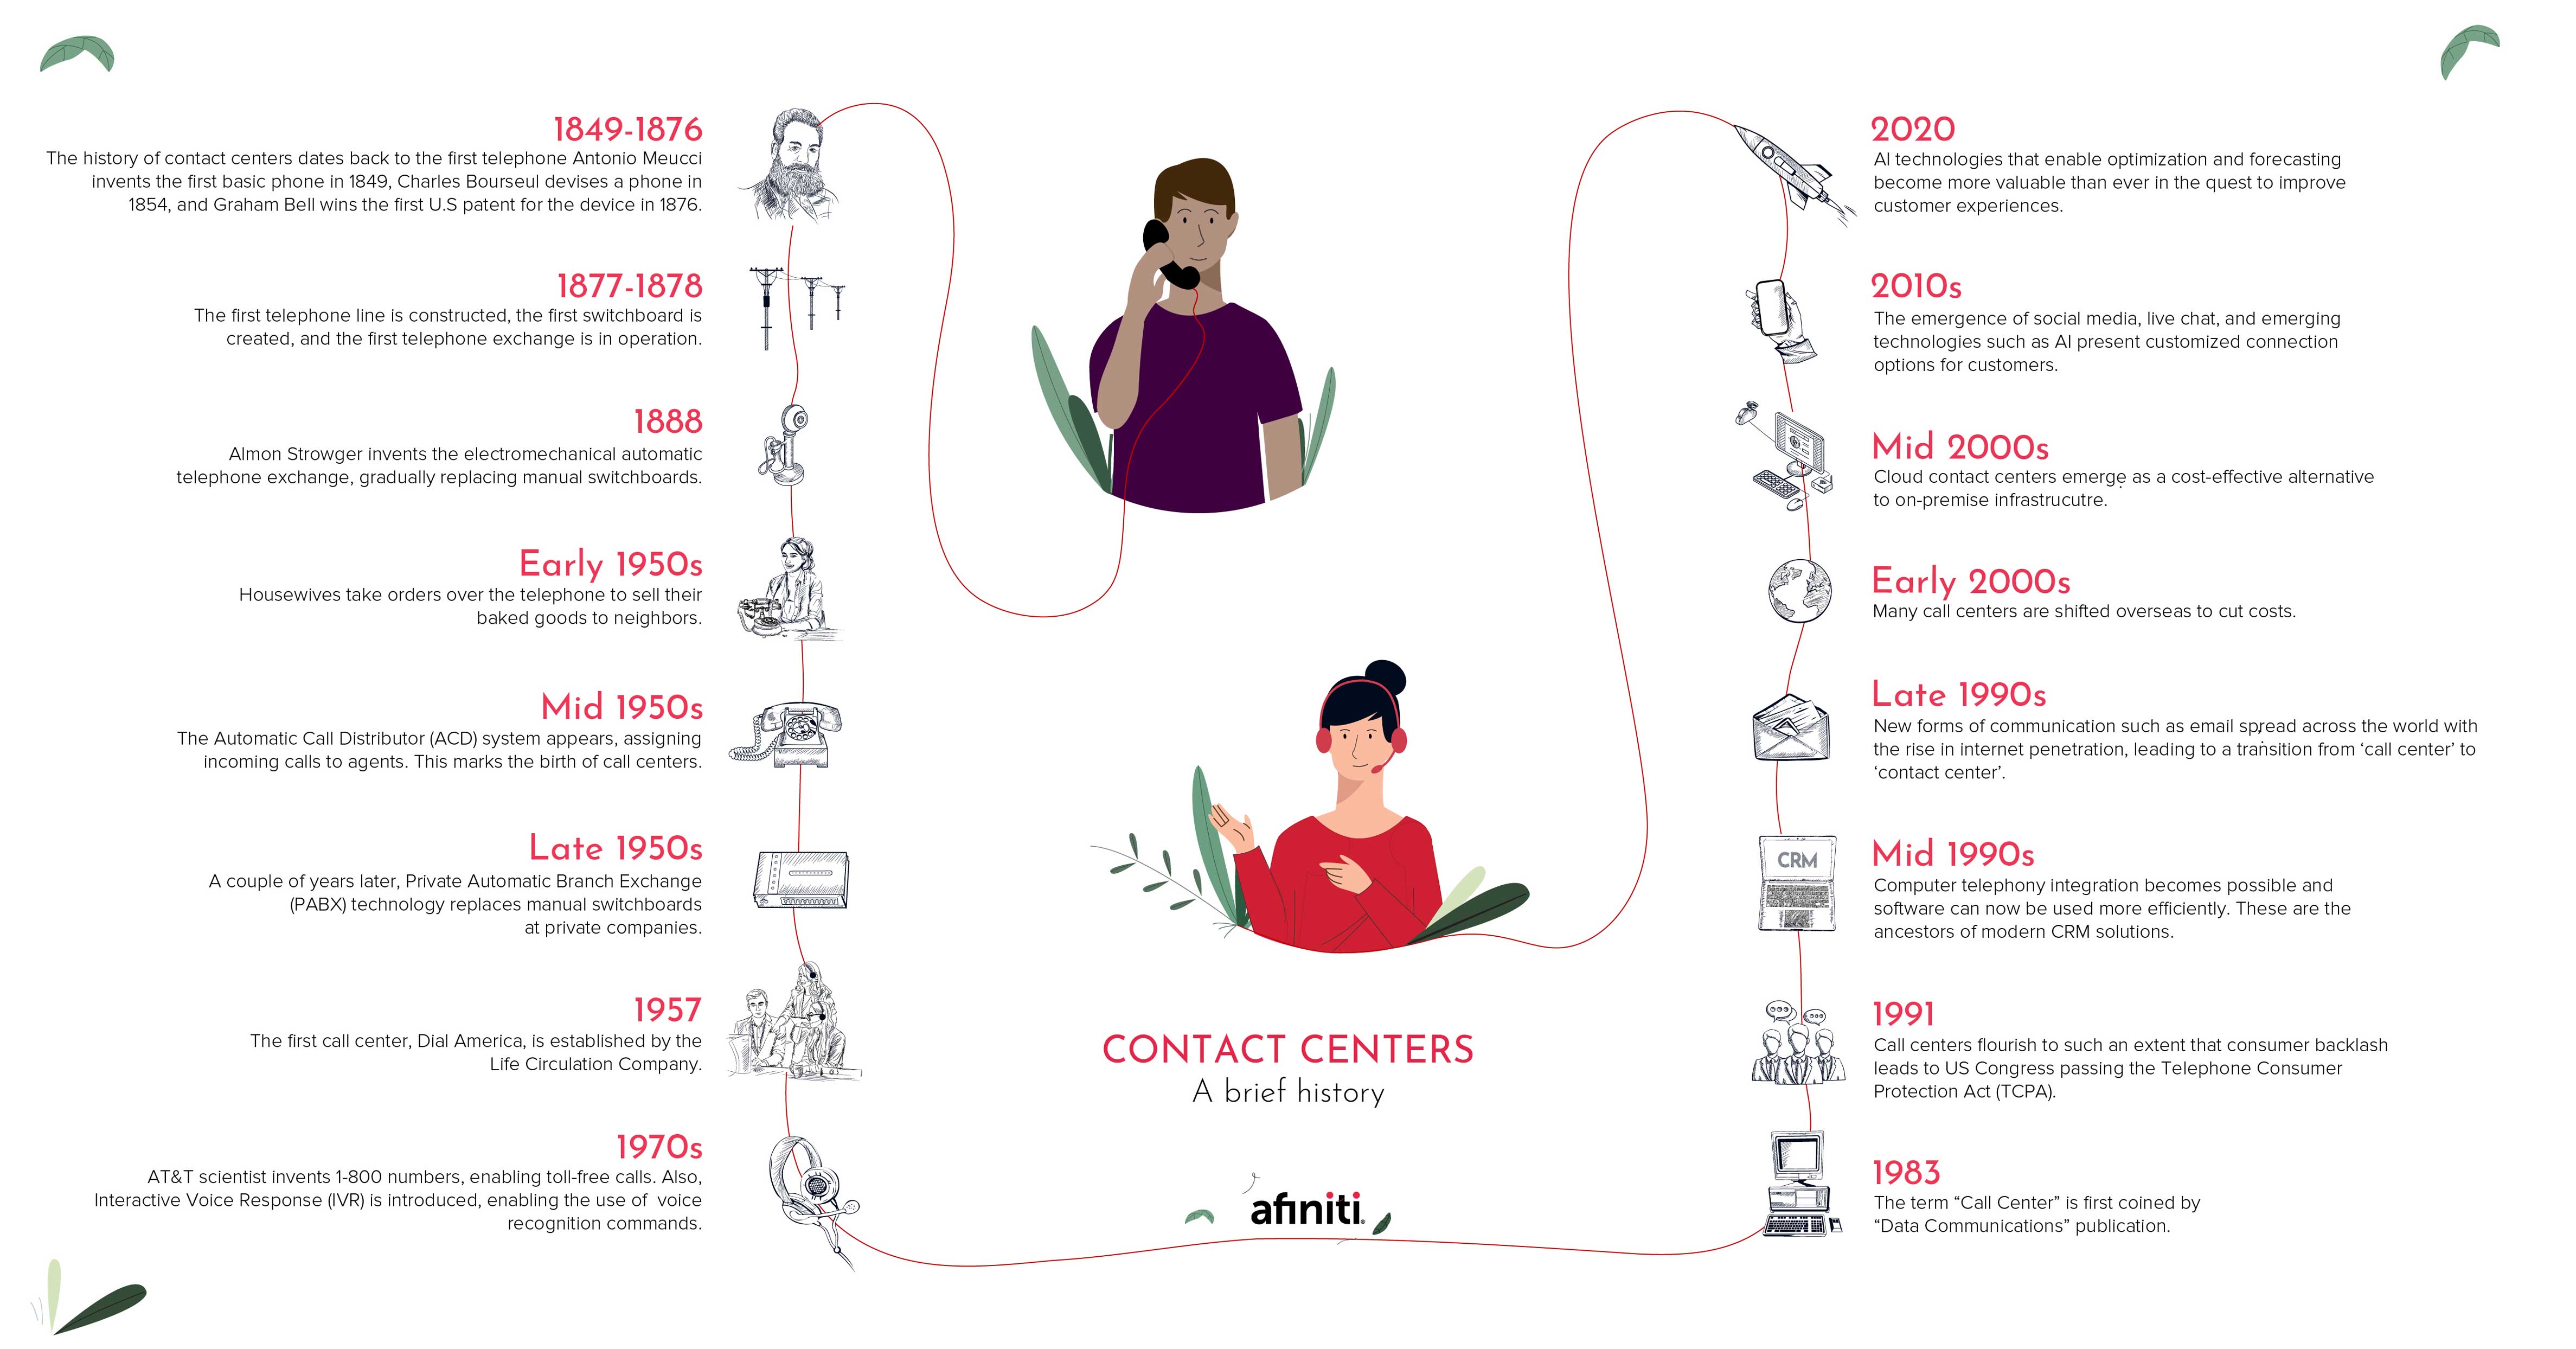 History_of_Contact_Centers_Infographic.jpg